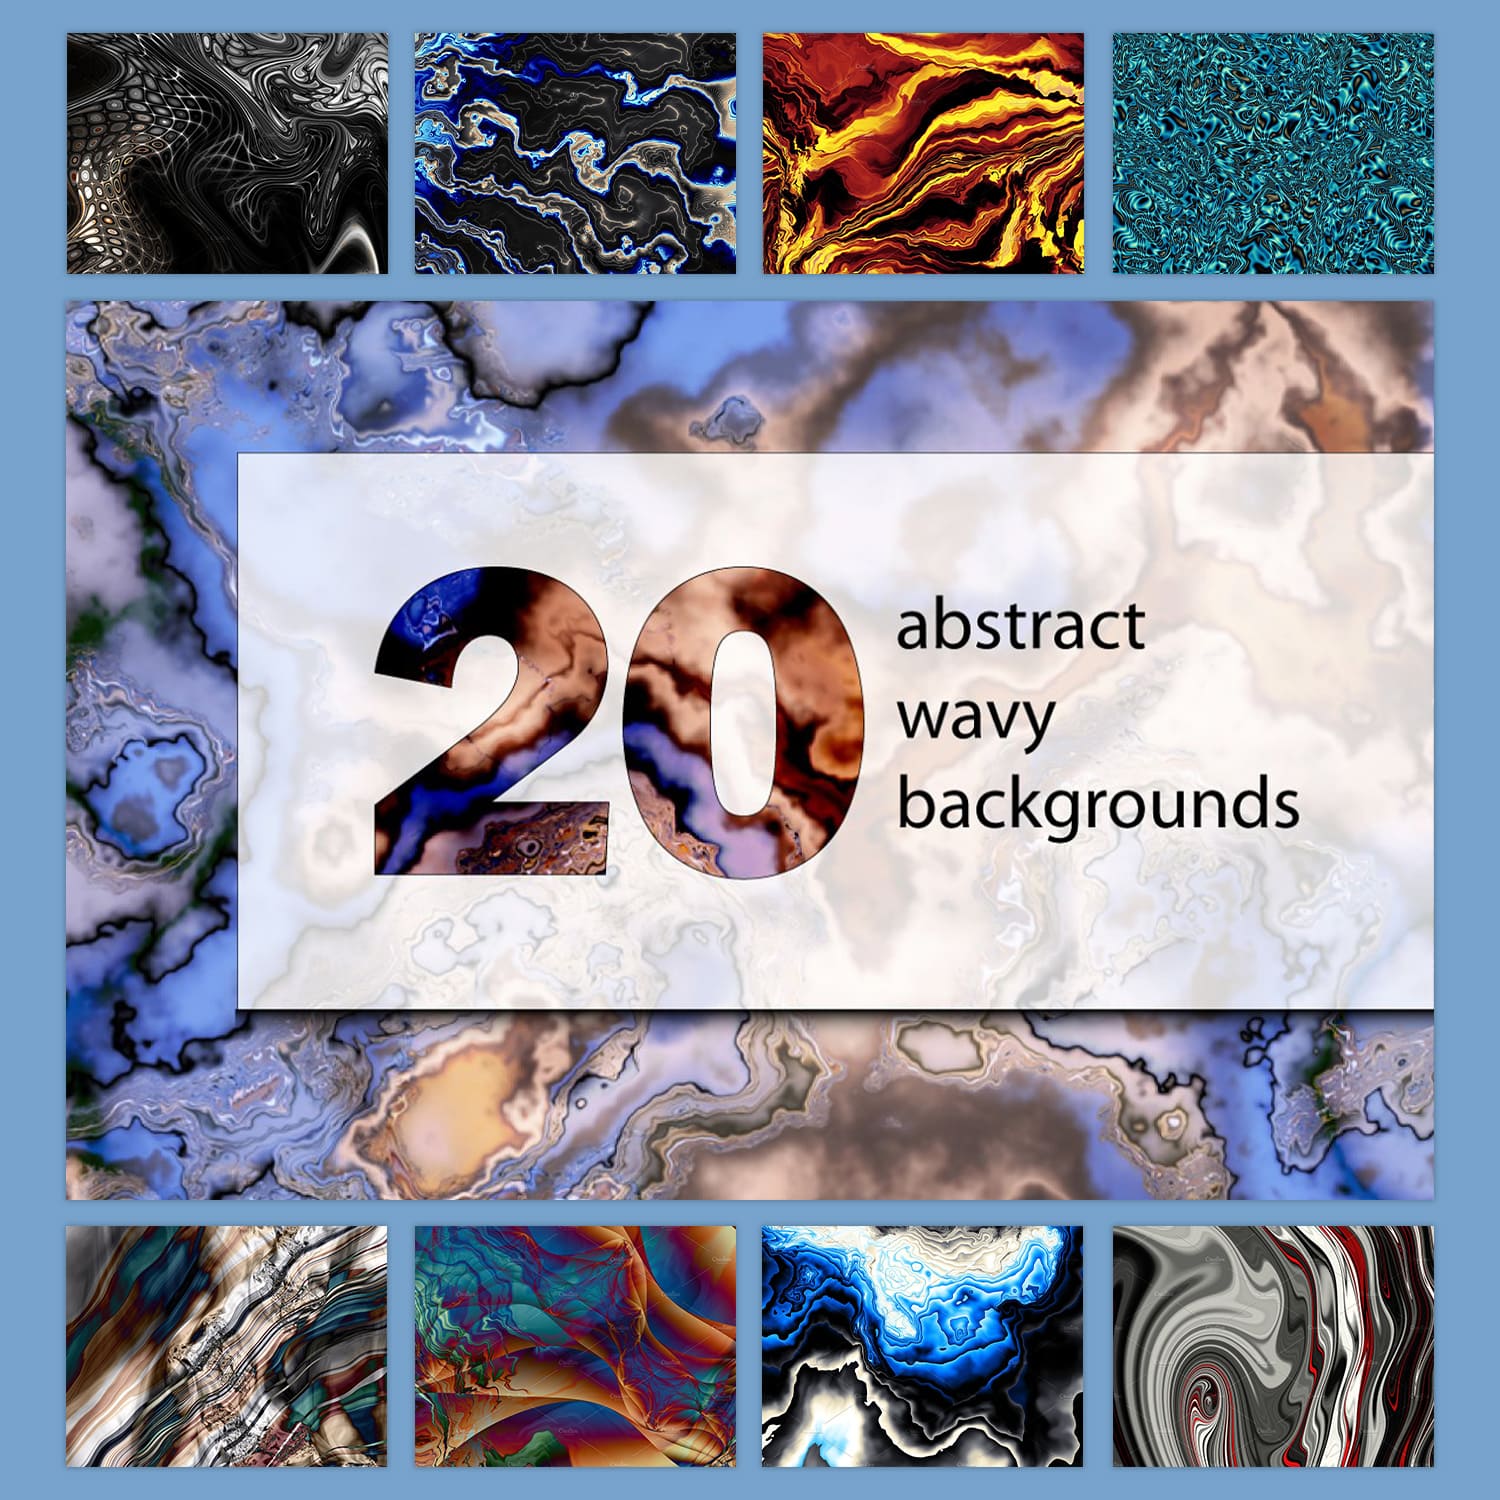 20 Abstract Wavy Backgrounds cover image.